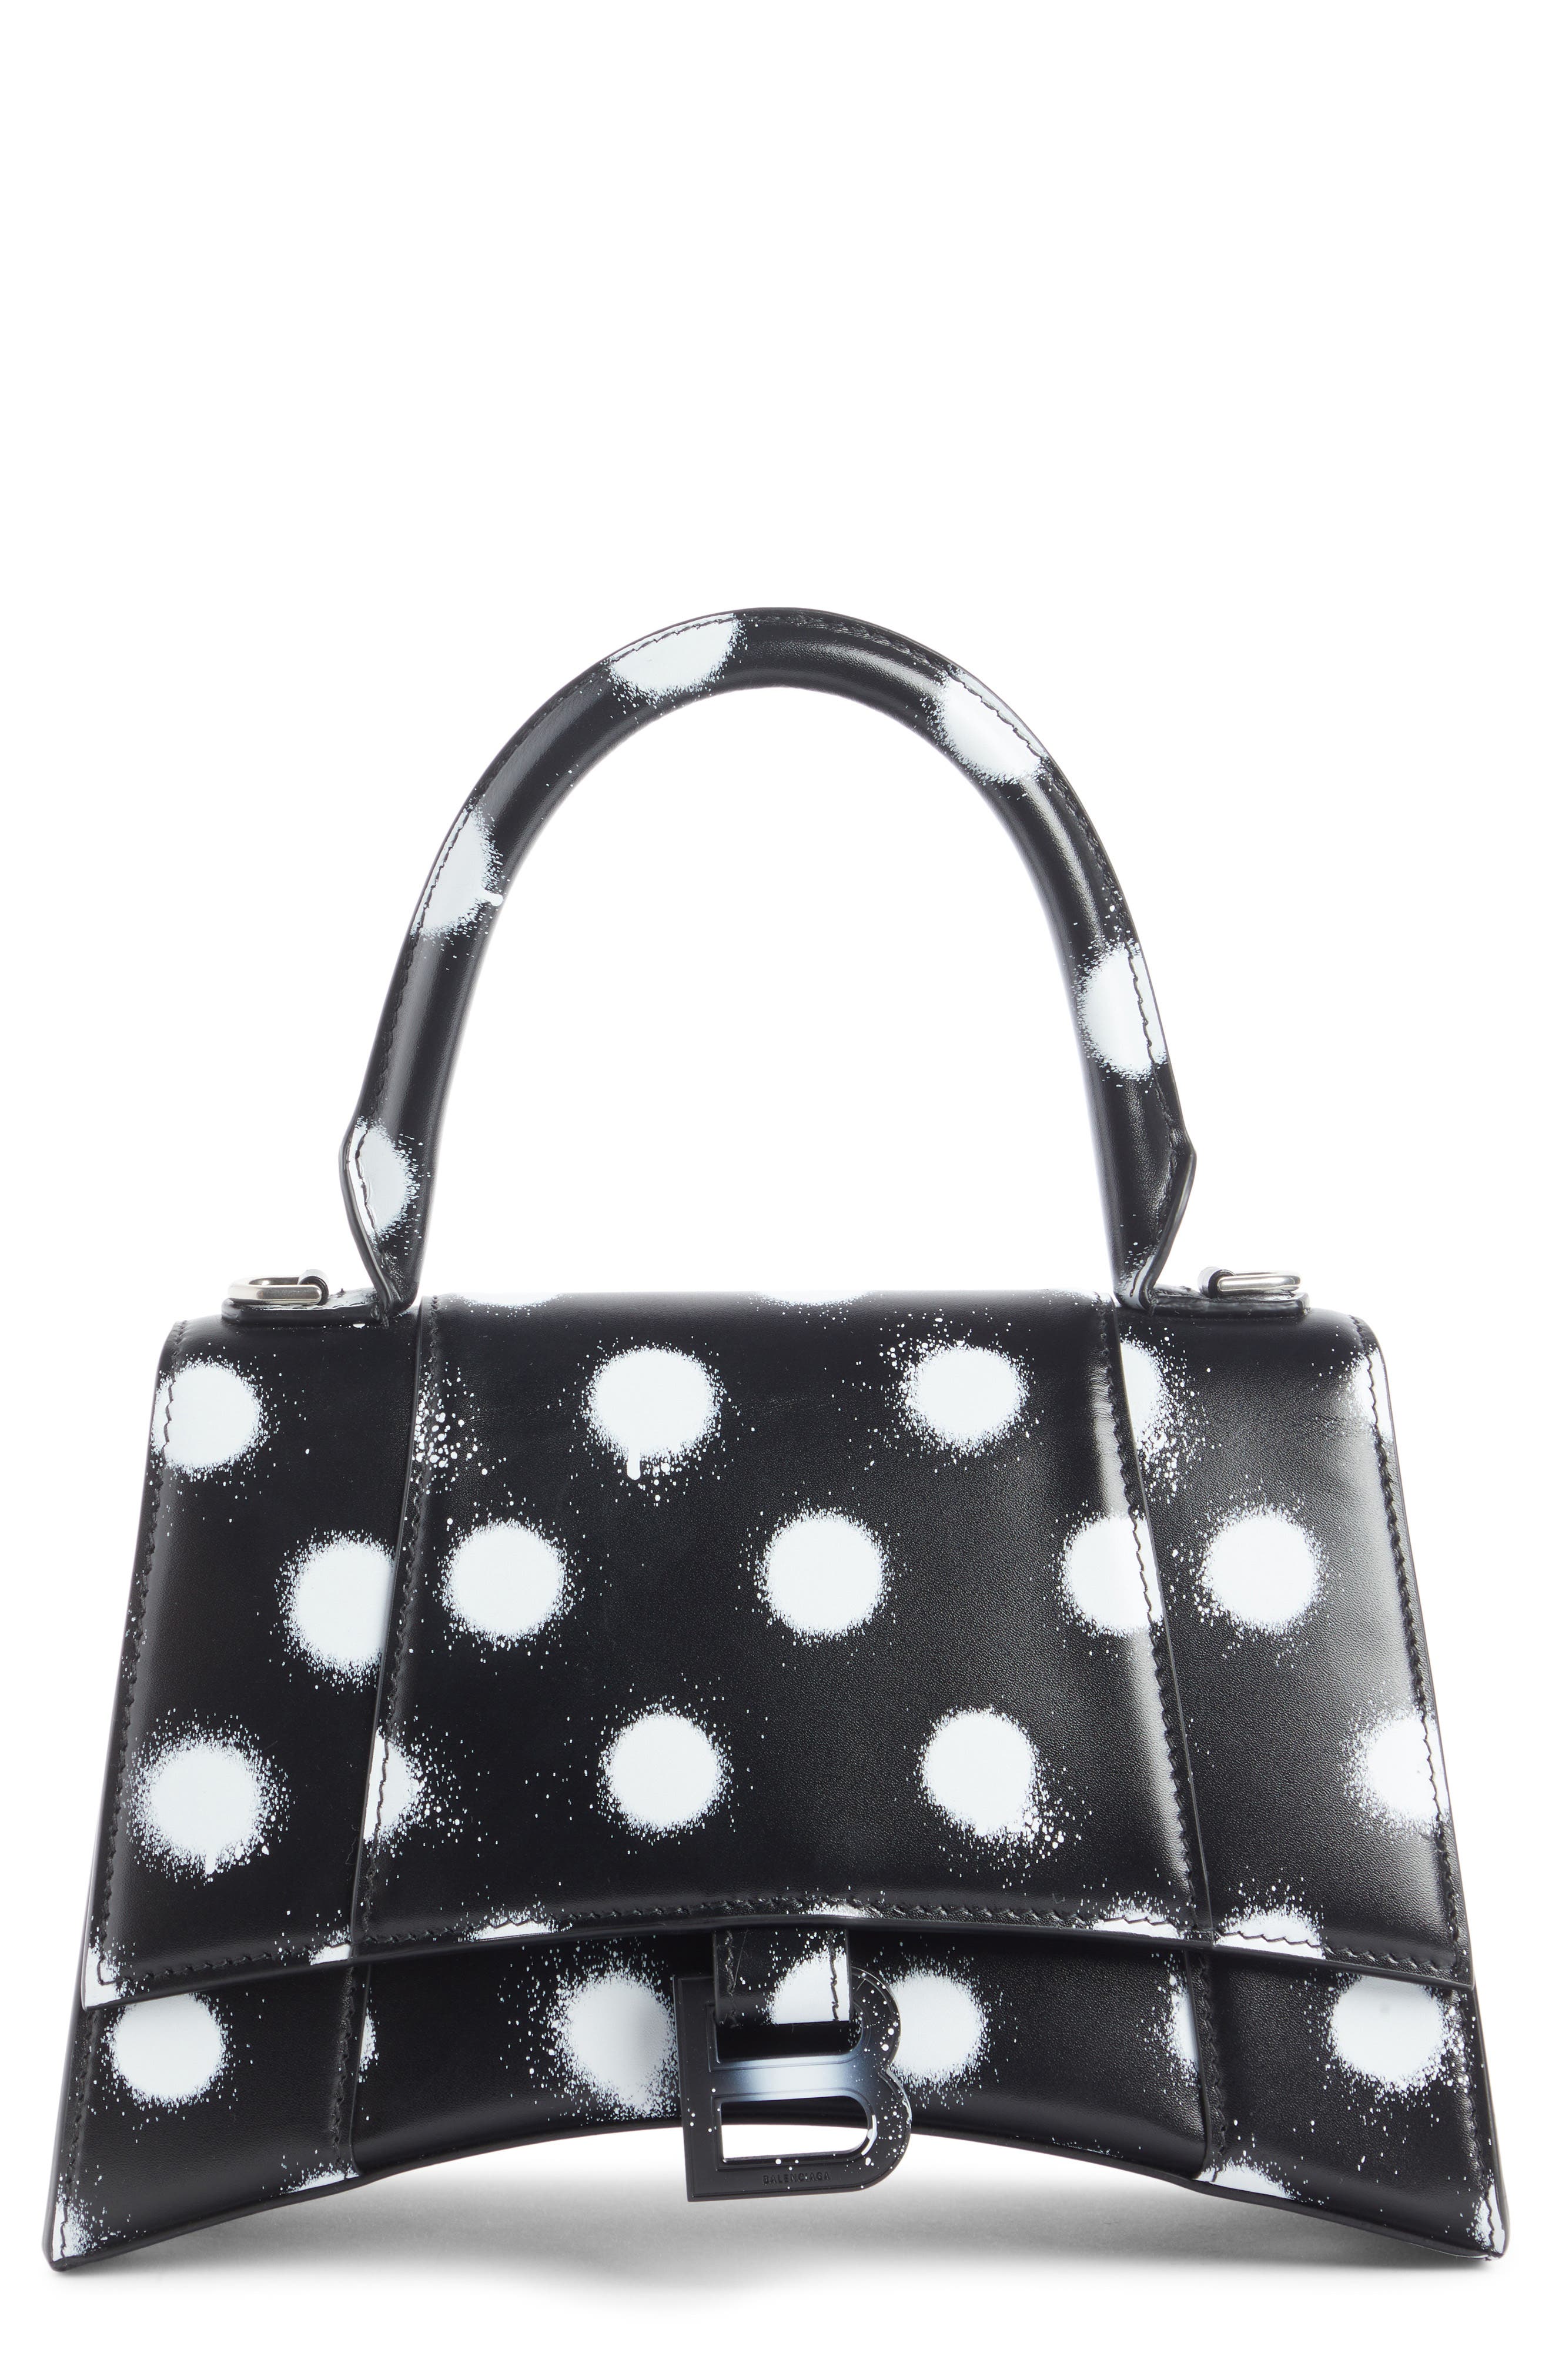 Balenciaga Small Hourglass Polka Dot Leather Top Handle Bag in Black/White at Nordstrom